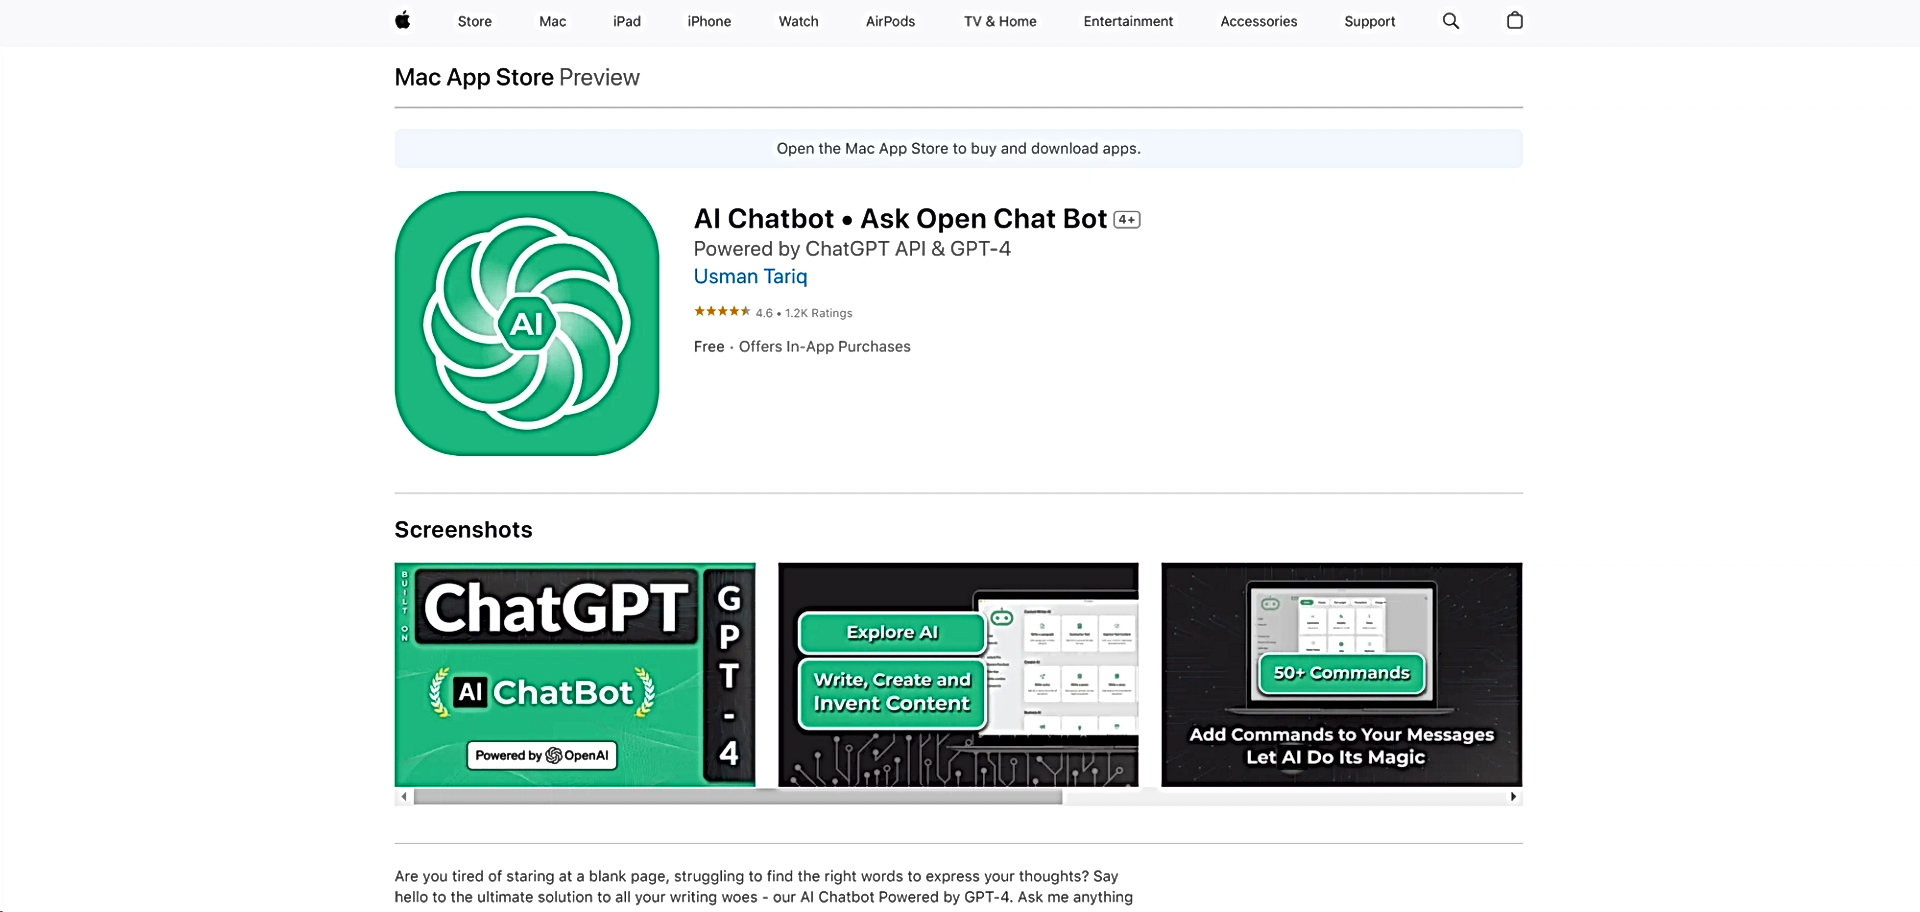 AI Chatbot featured